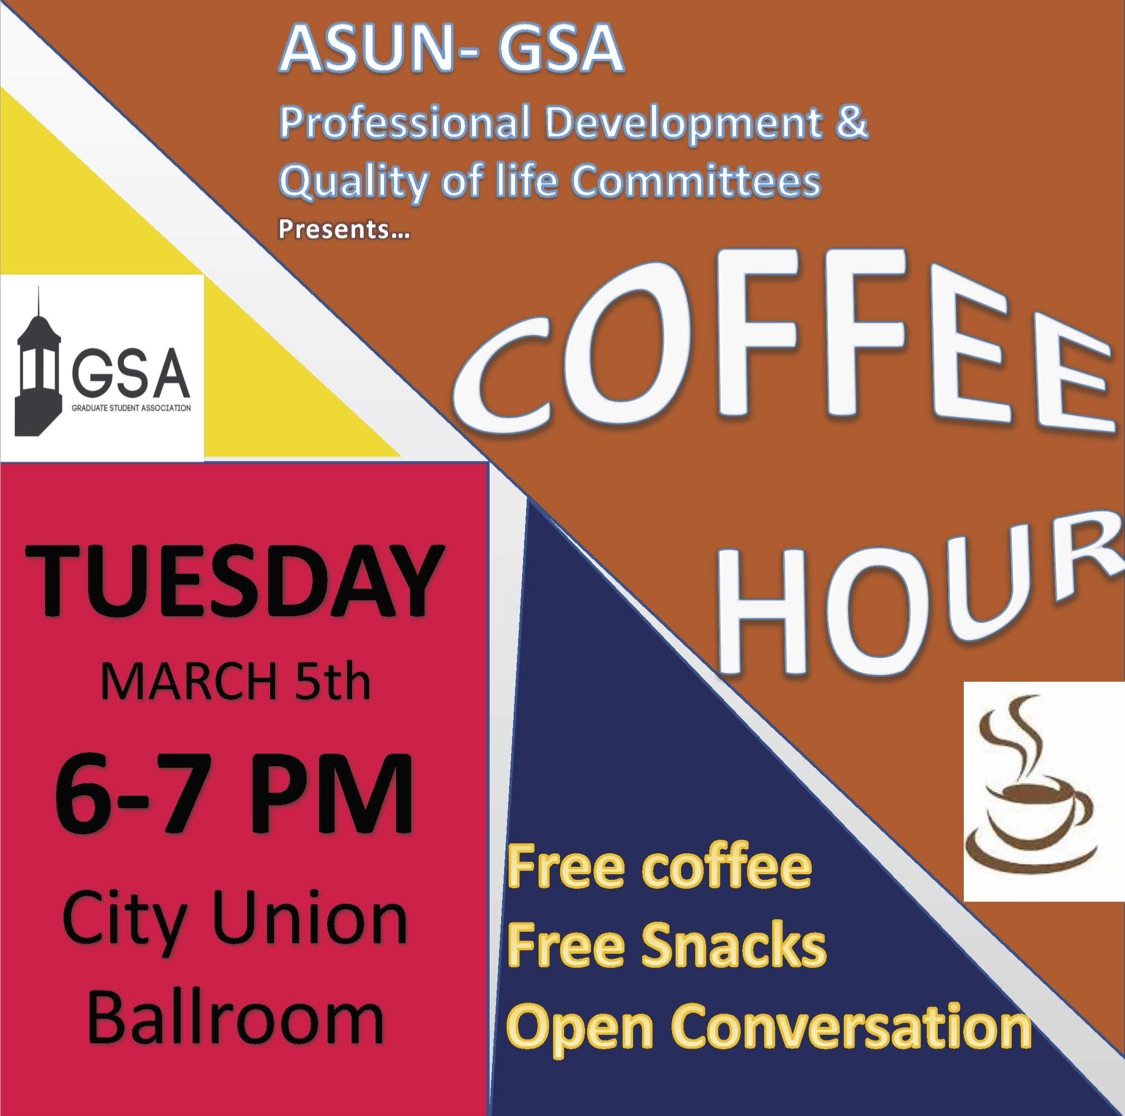 Join the GSA for free coffee, snacks and good conversation.